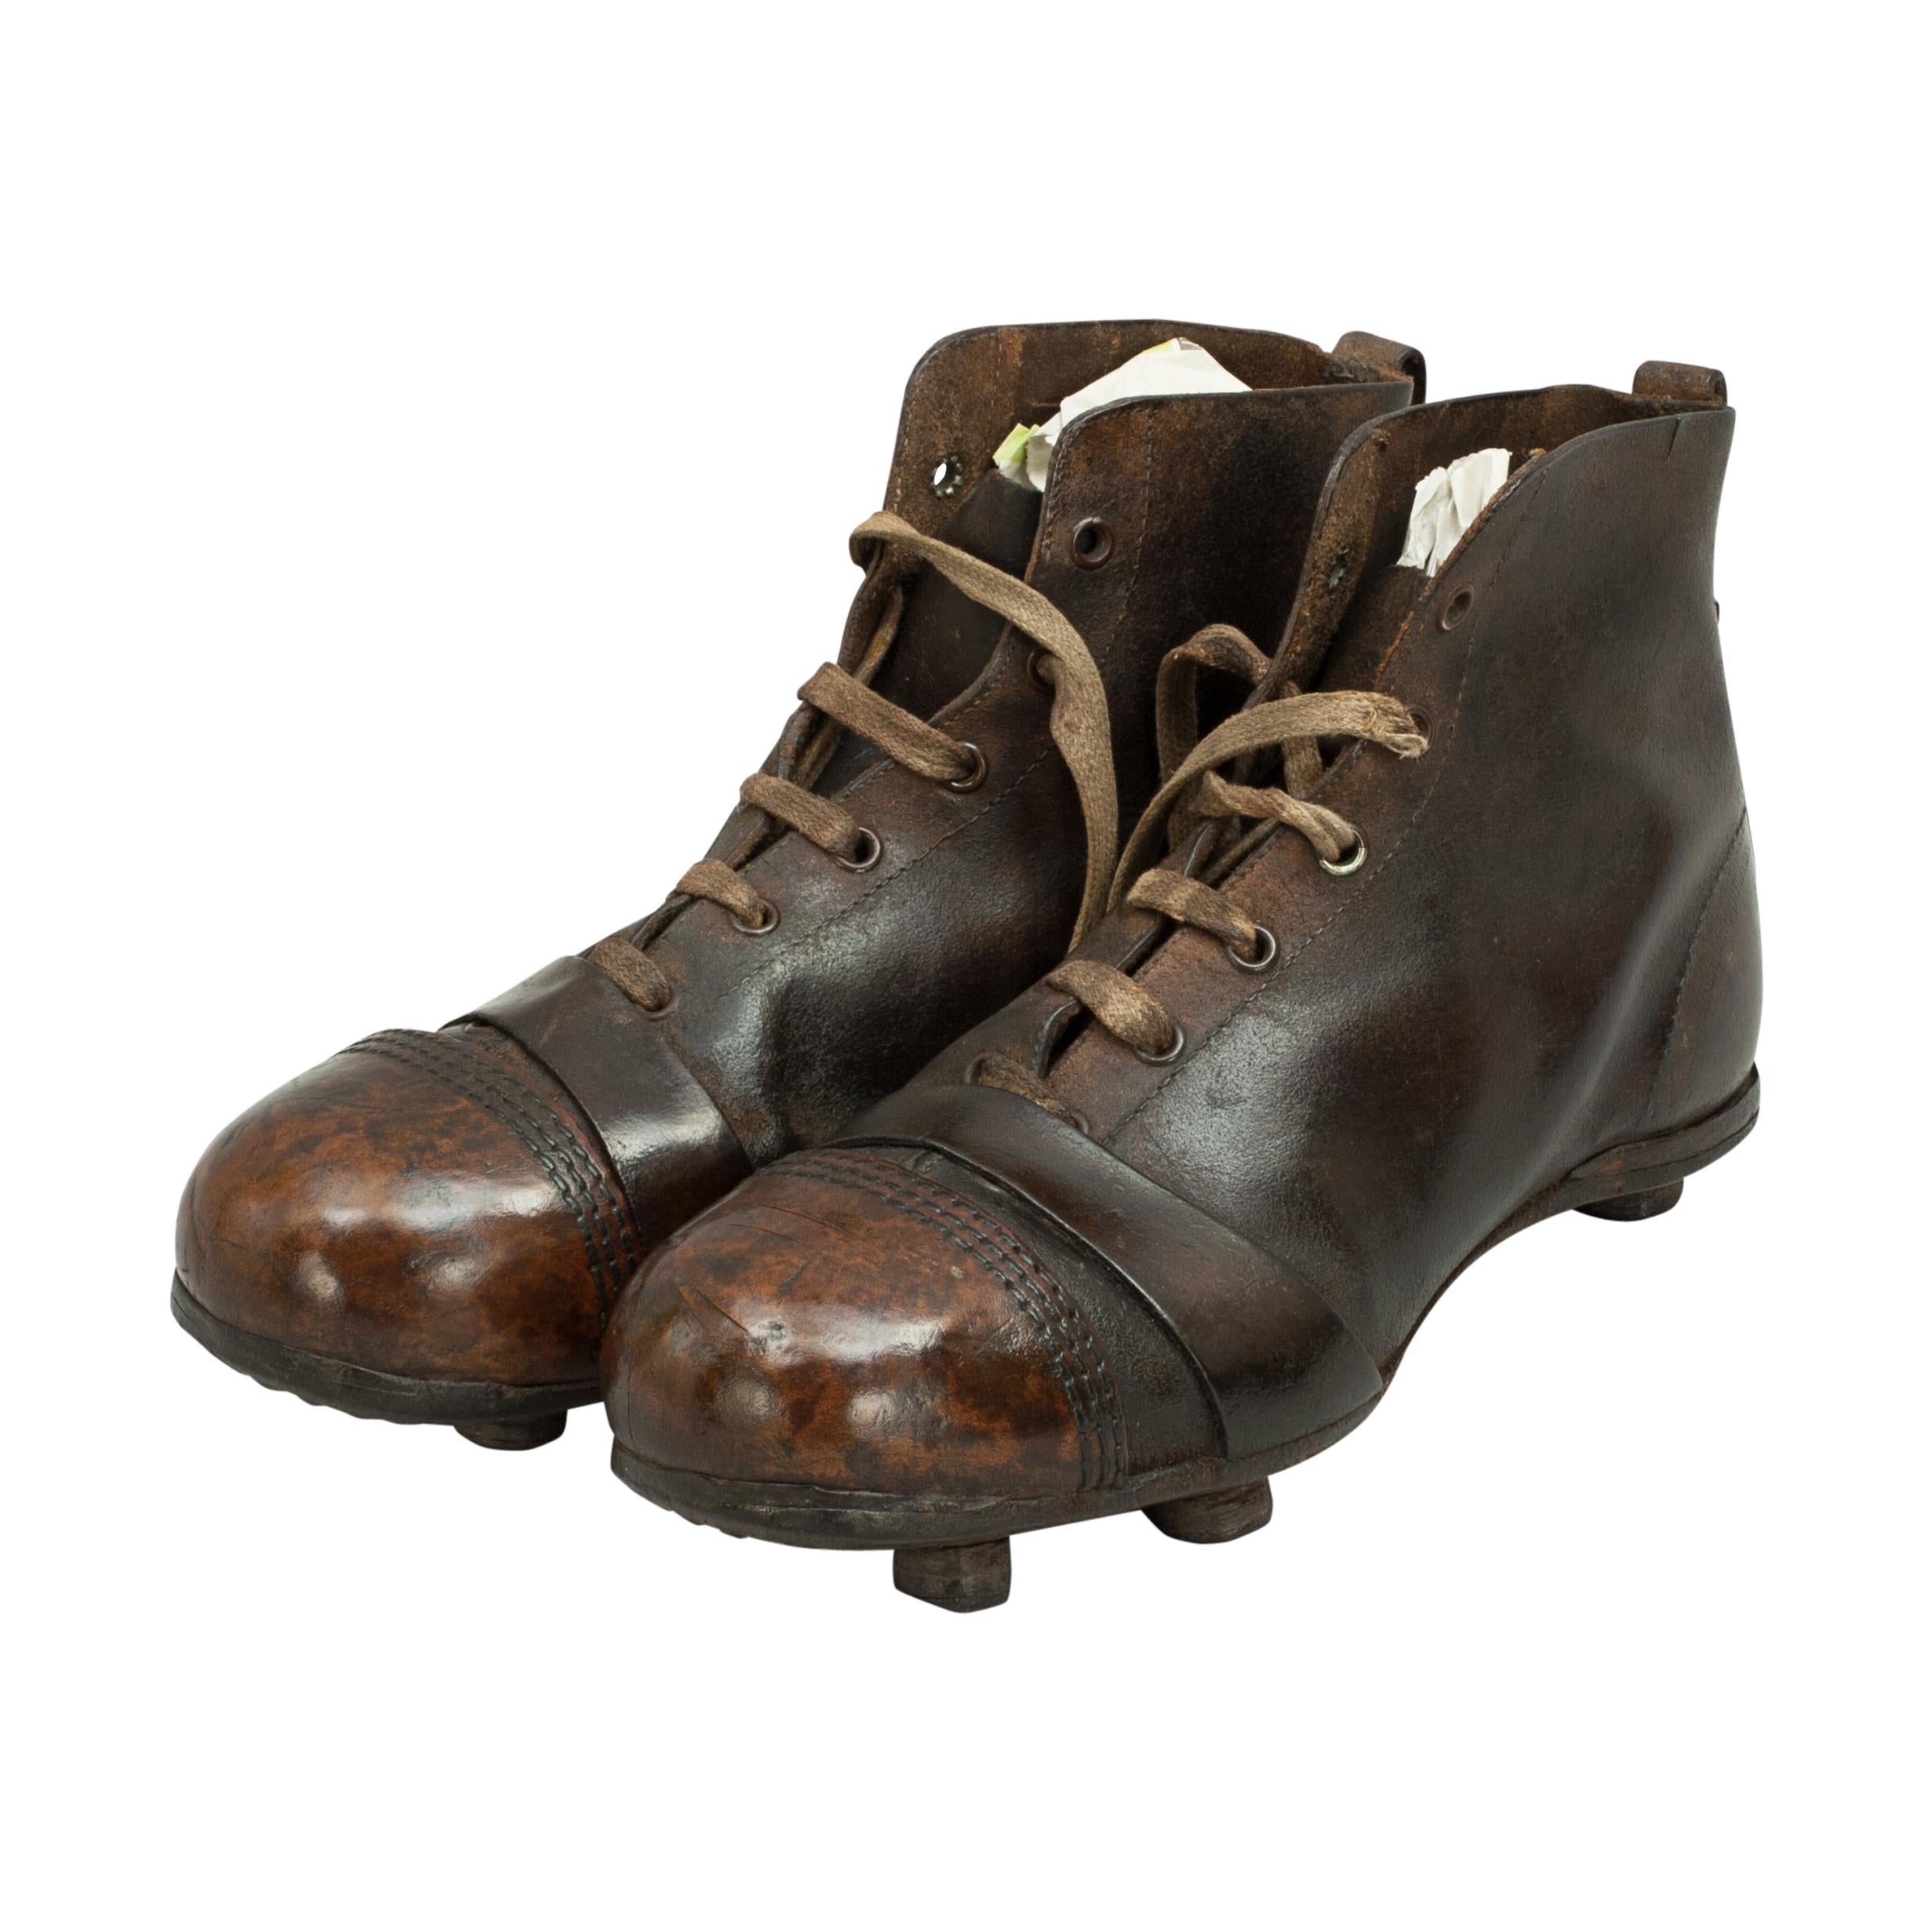 Antique Football / Rugby Boots in Brown Leather with Great Patina